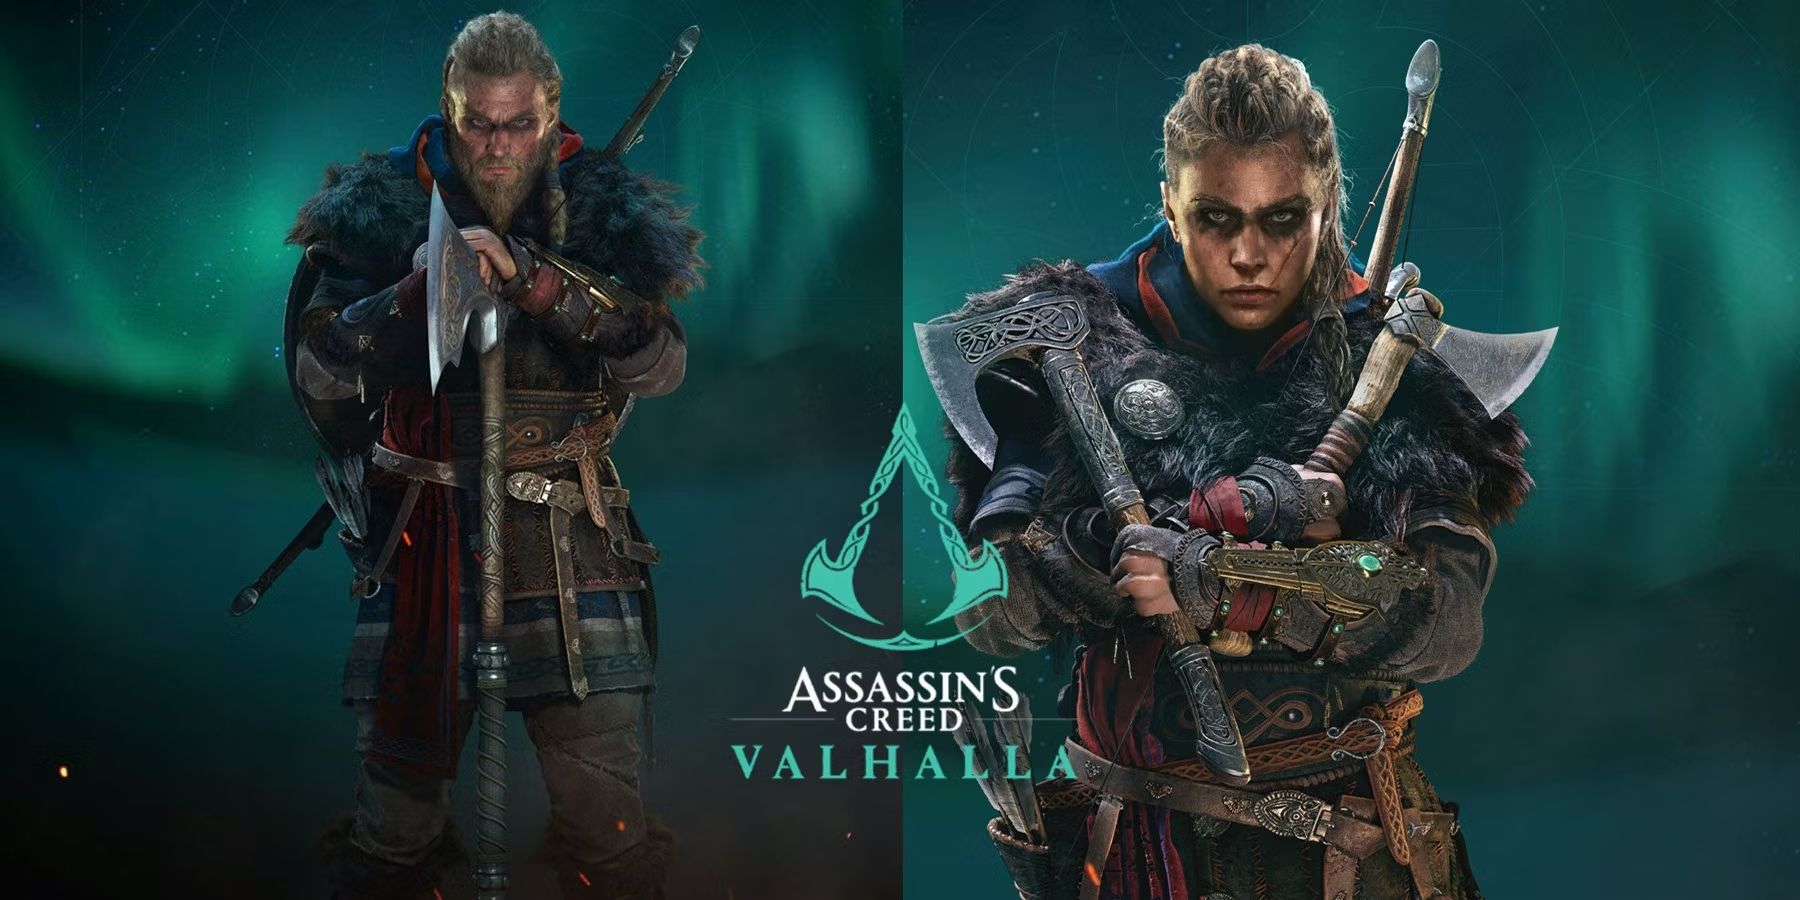 Assassin's Creed Valhalla update adds new themed content